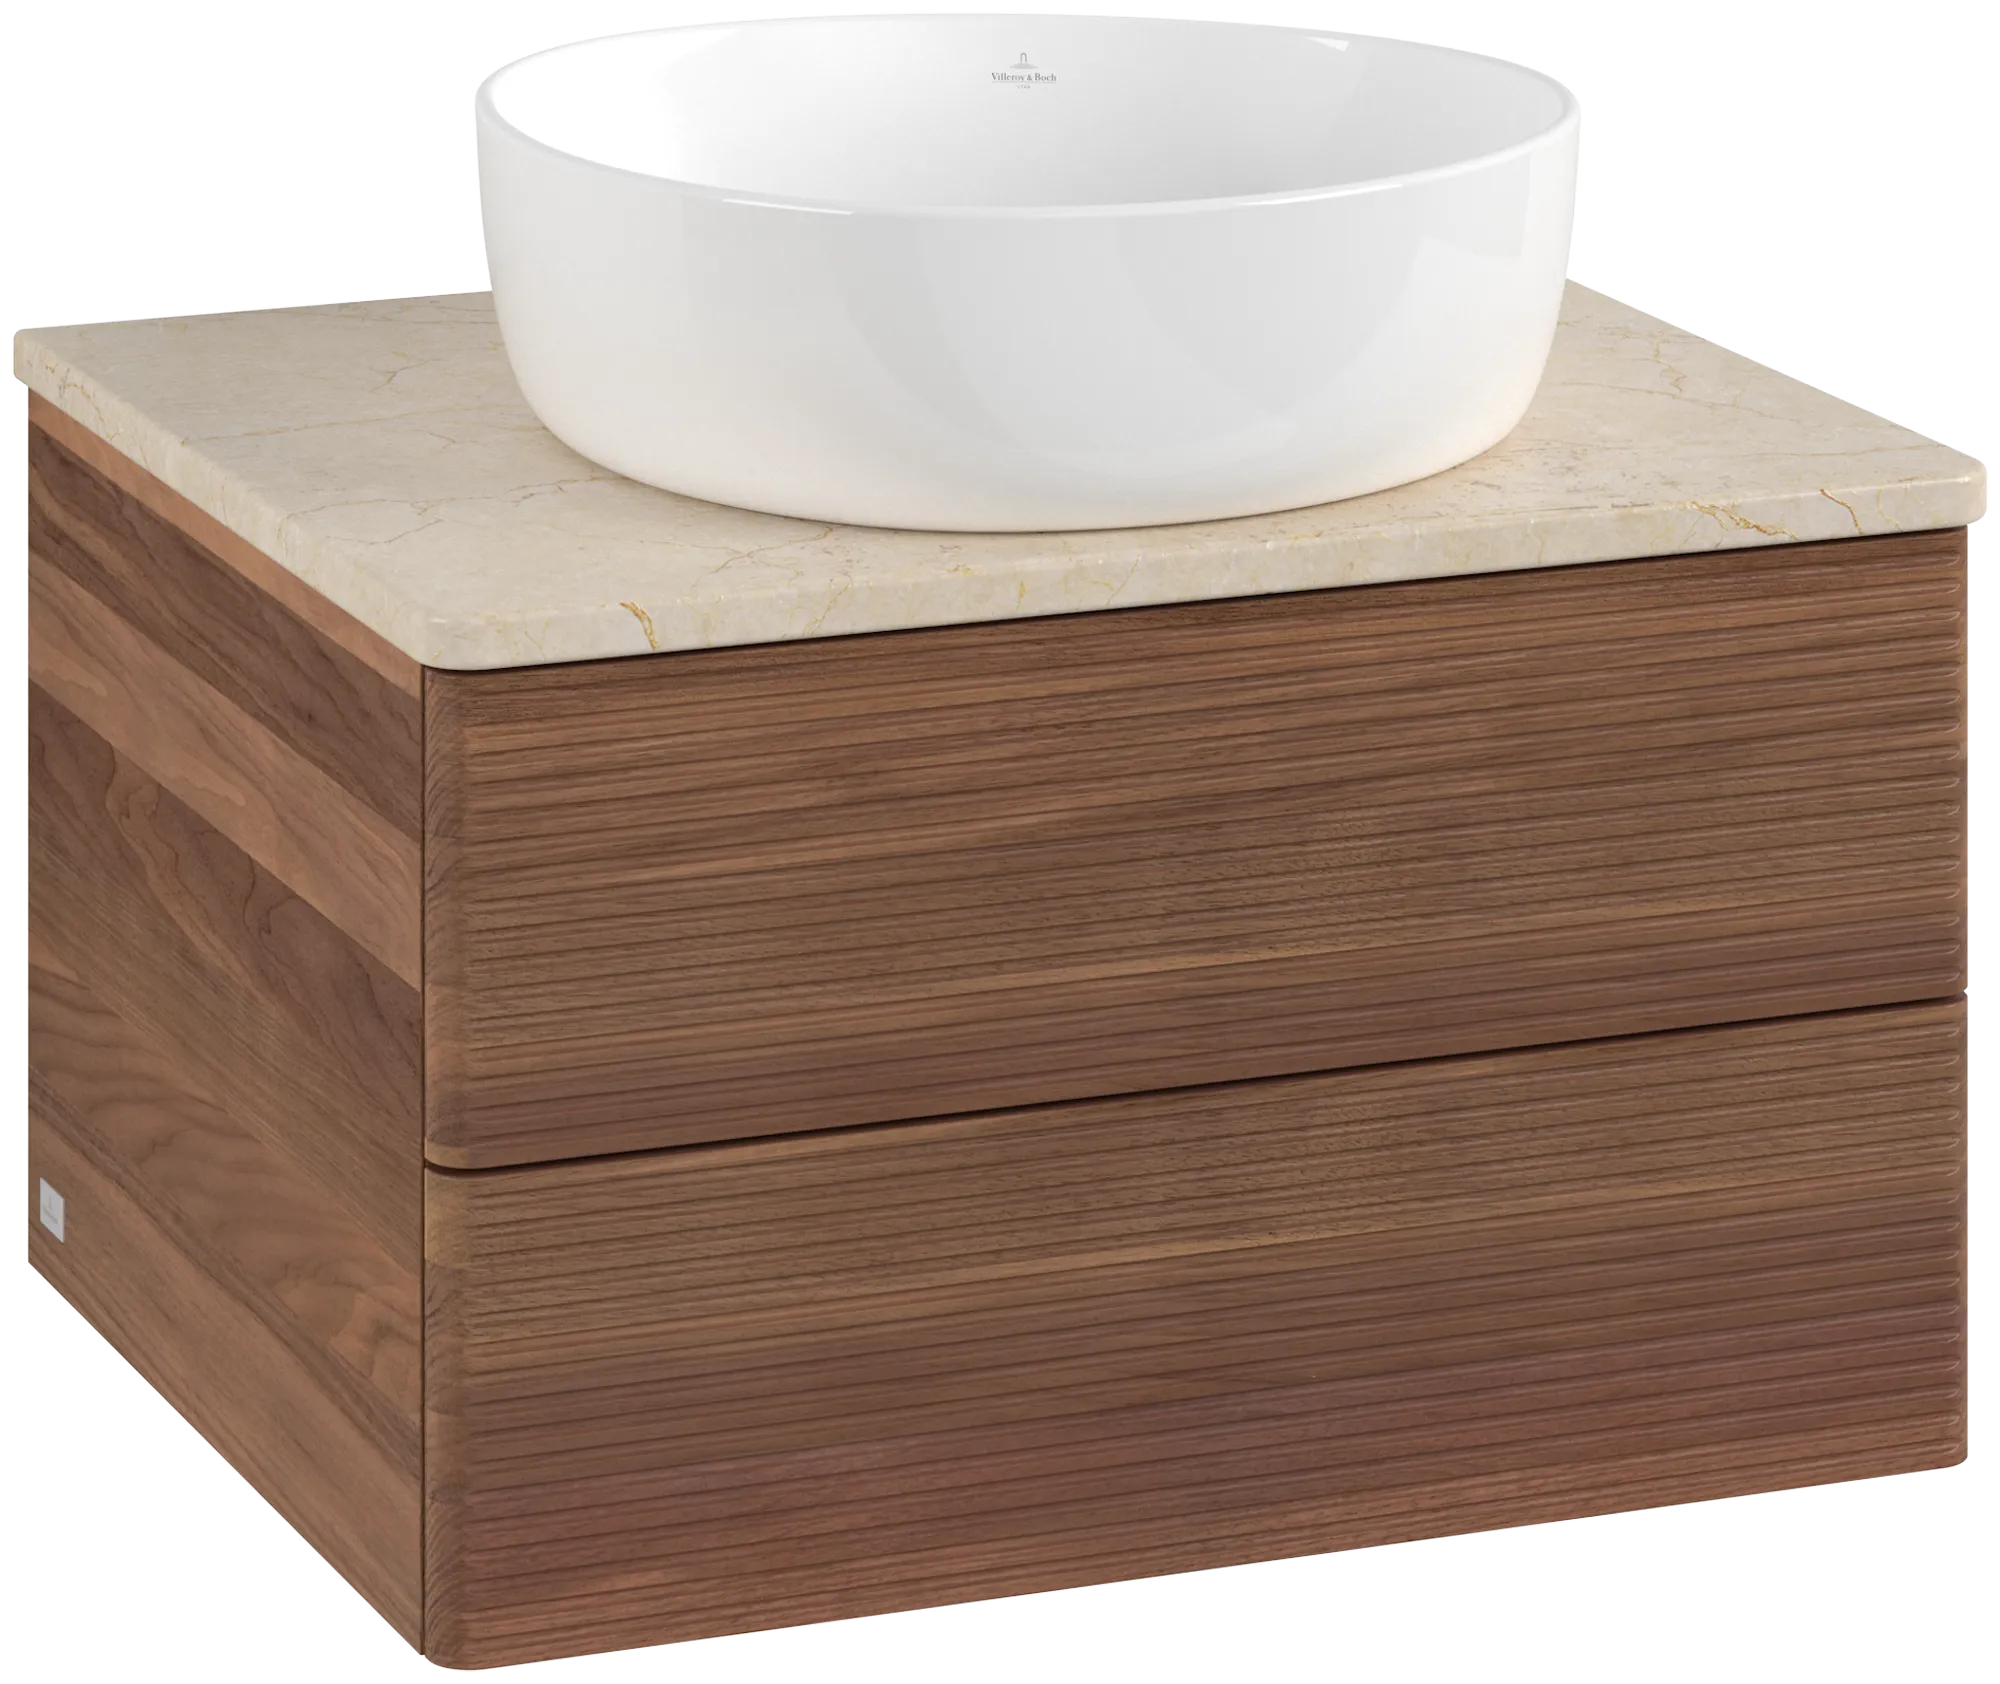 Picture of VILLEROY BOCH Antao Vanity unit, with lighting, 2 pull-out compartments, 600 x 360 x 500 mm, Front with grain texture, Warm Walnut / Botticino #L18113HM